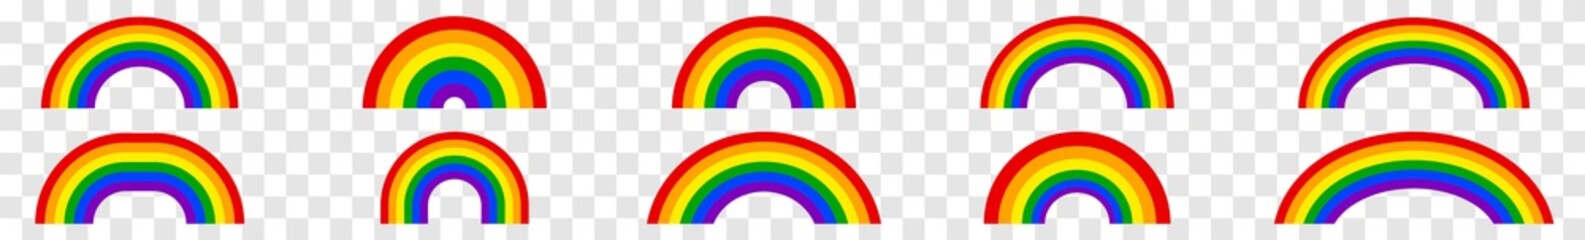 Rainbow Icon Colors | Rainbows | Peace Symbol | Weather Logo | Happy Sign | Isolated Transparent | Variations